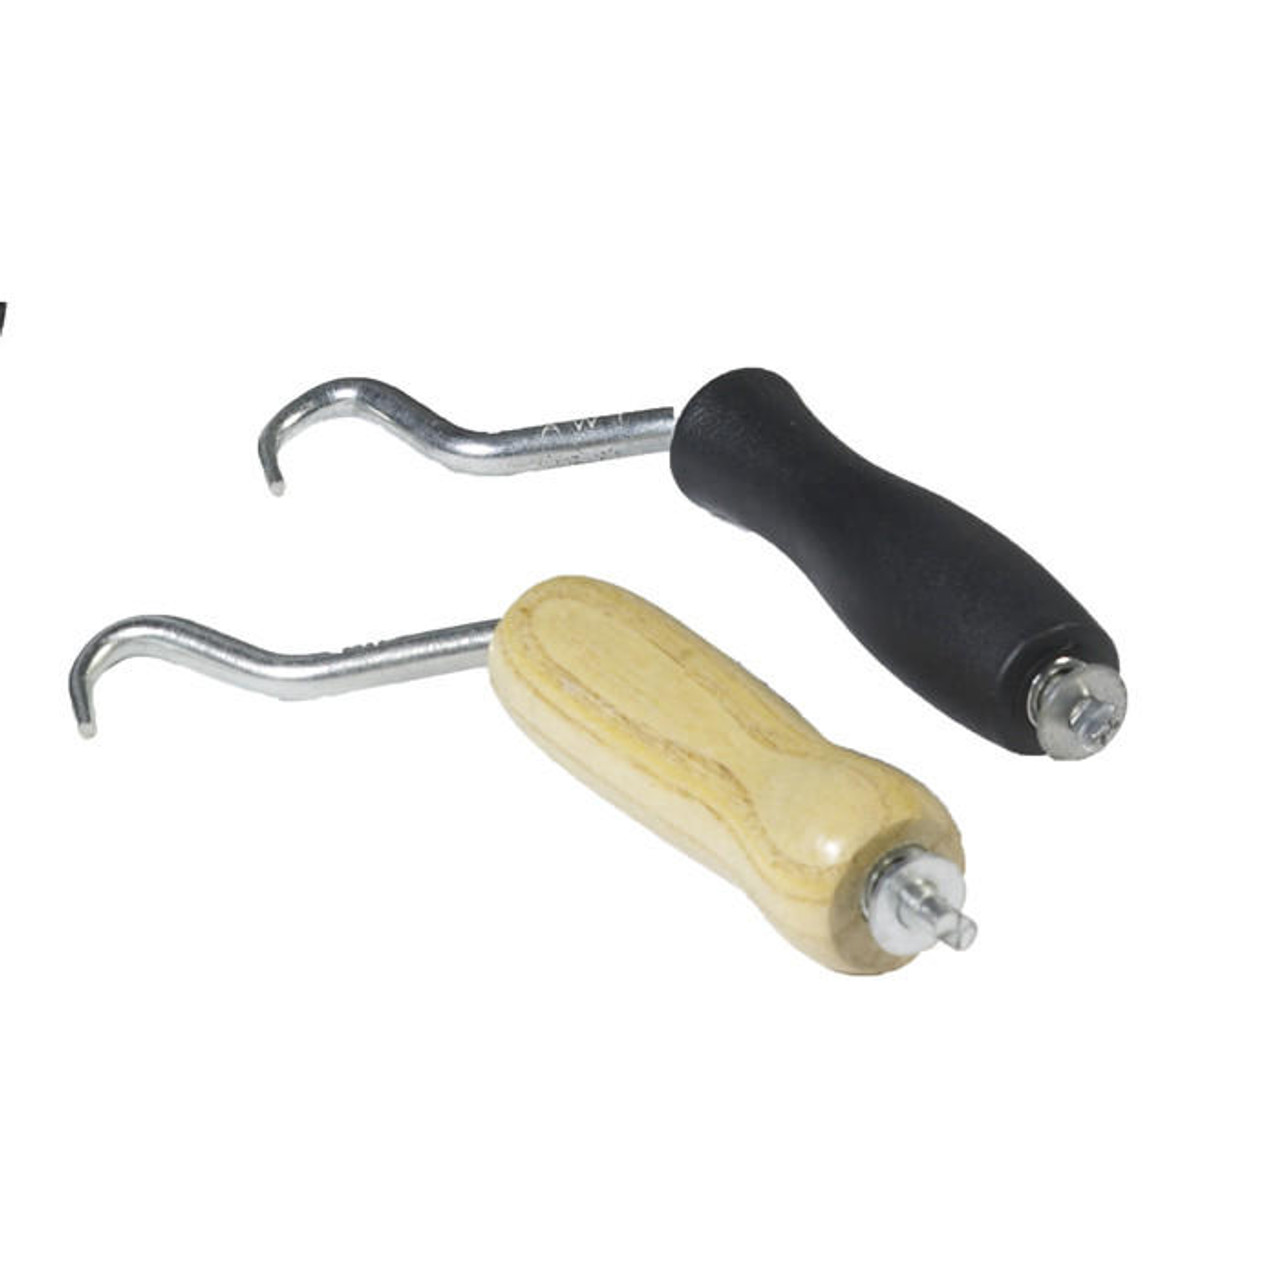 Twist Tools for tying wire